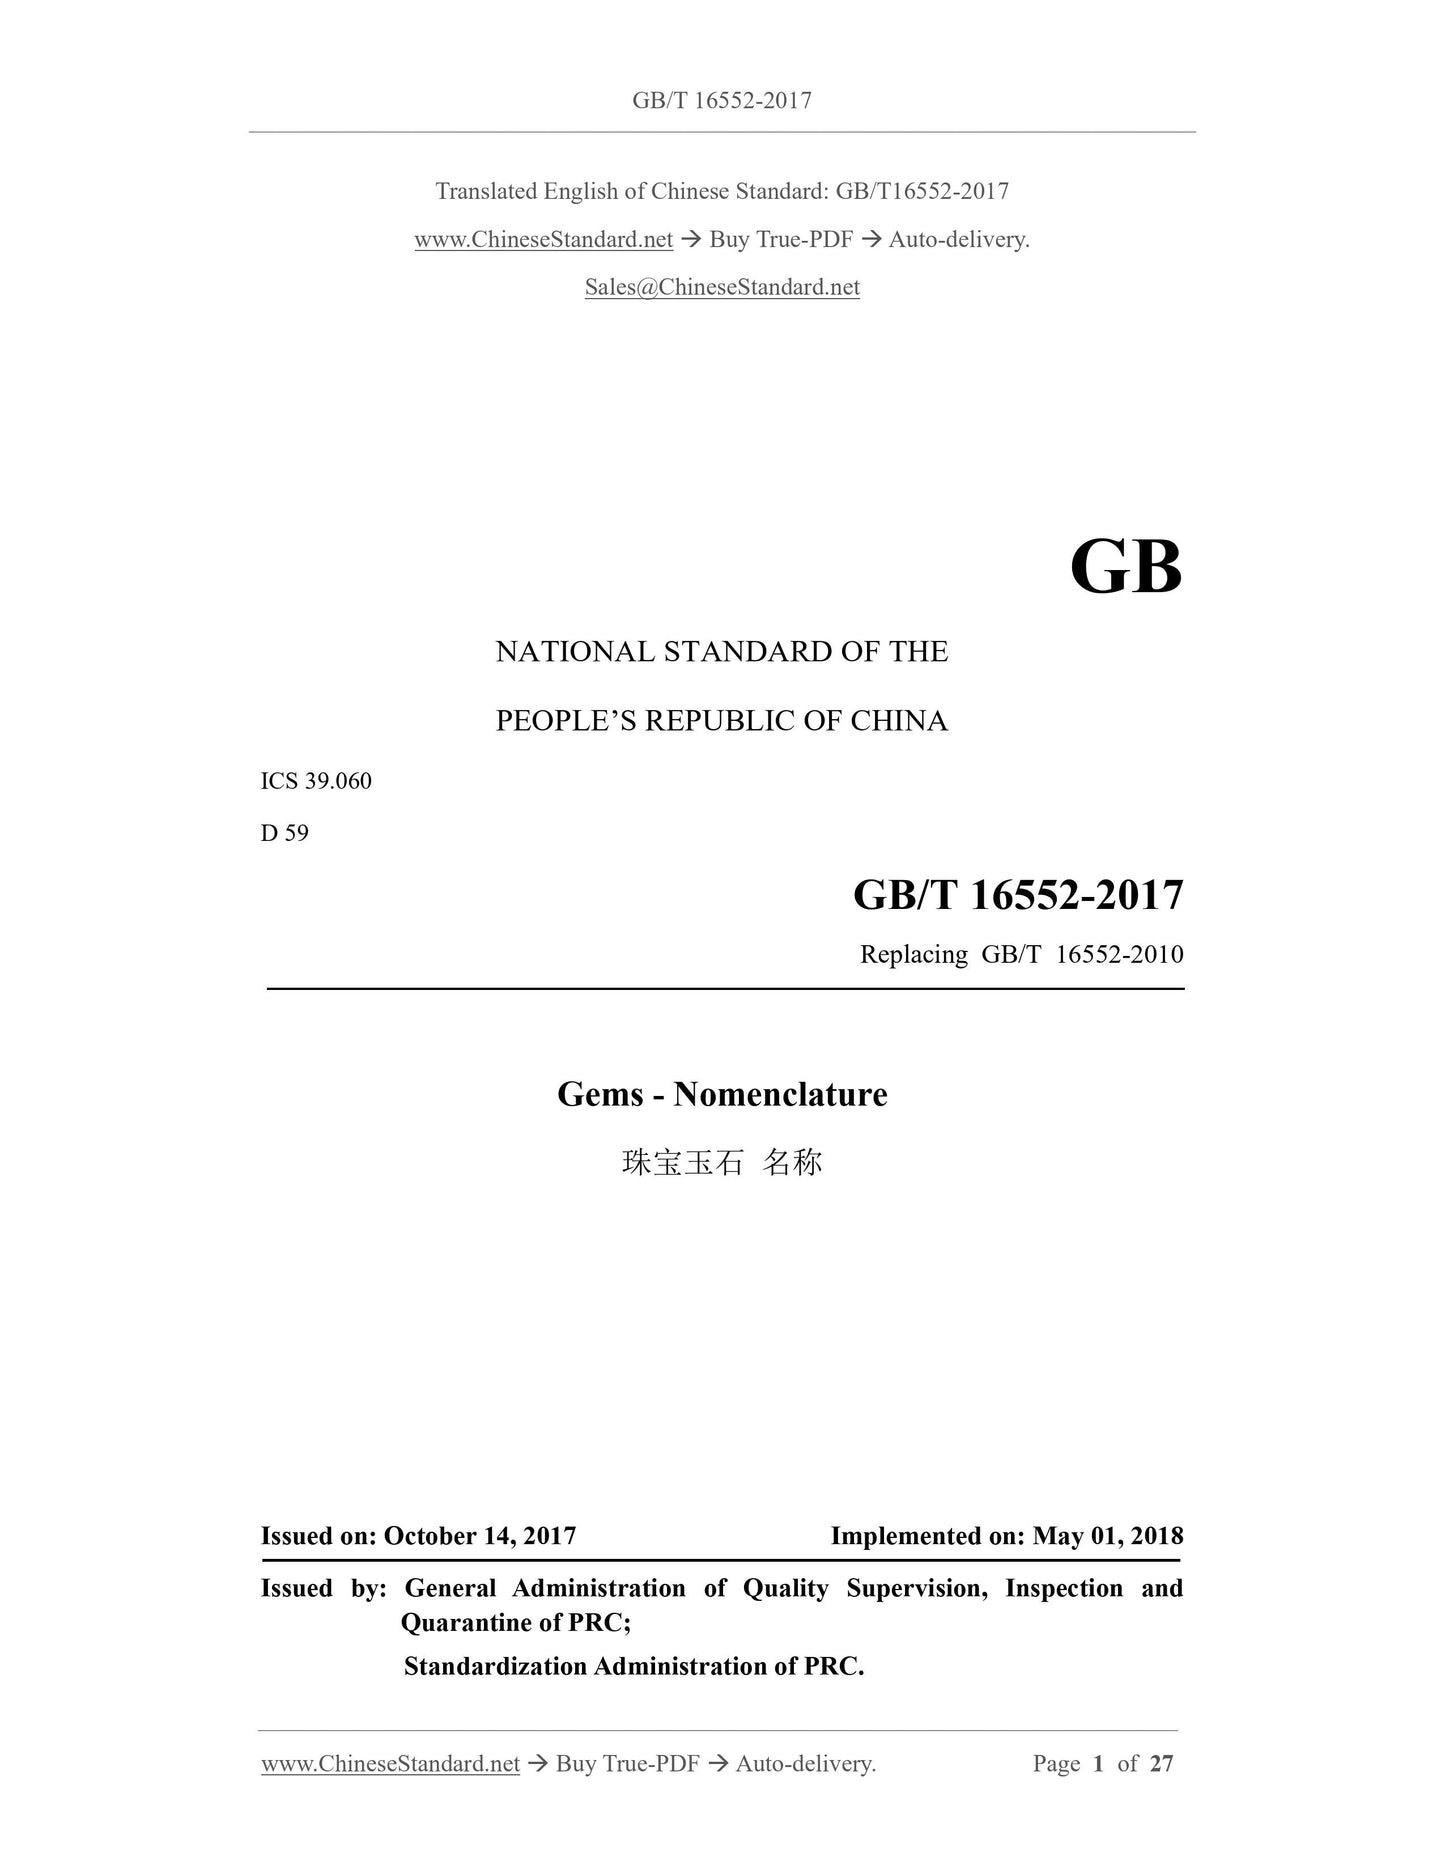 GB/T 16552-2017 Page 1